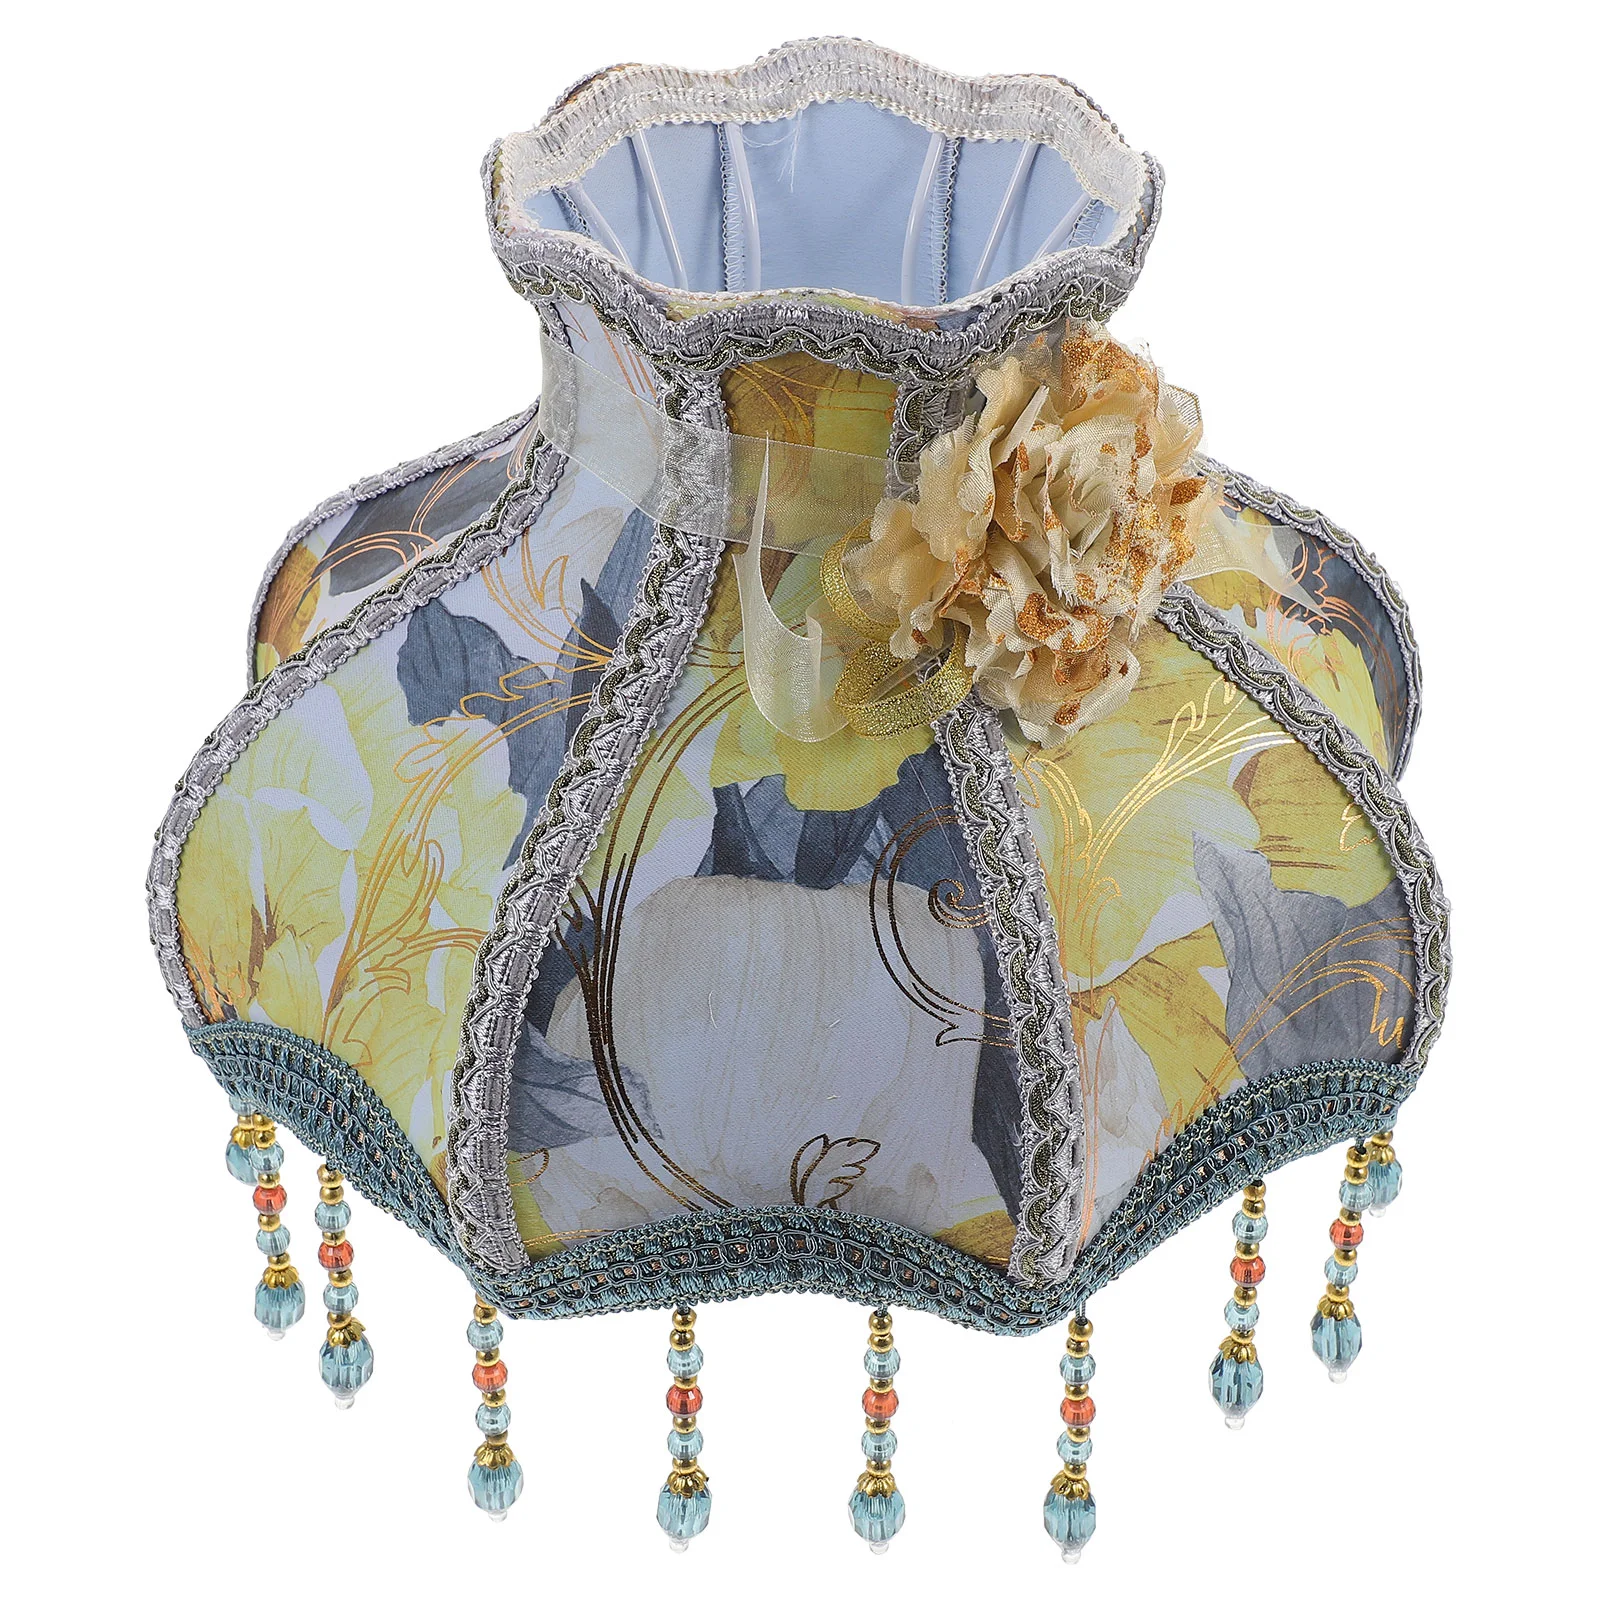 

European Style Lampshade Vintage Cloth Art Fringe Bead Lamp Shade Beads Tassel Fabric Flower Scallop Dome Light Cover Living